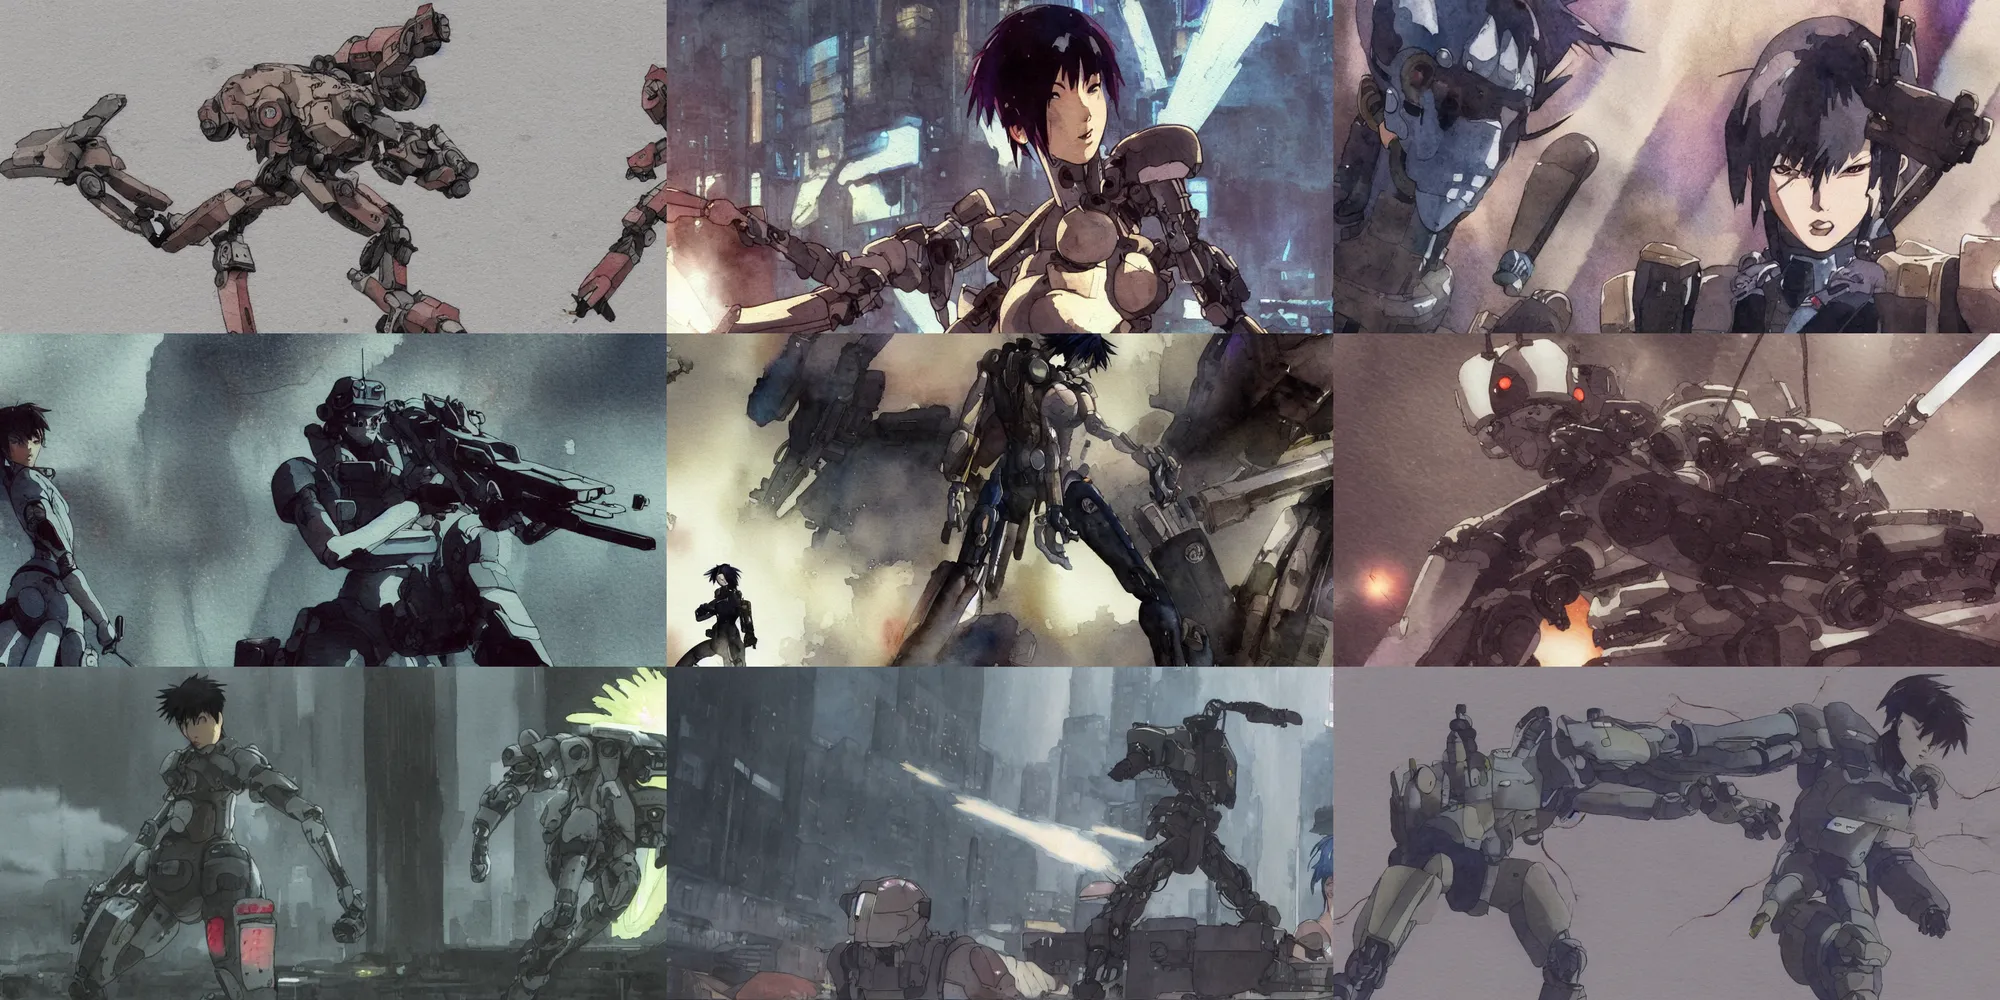 Prompt: incredible screenshot, simple watercolor, masamune shirow ghost in the shell movie scene close up broken Kusanagi tank battle, brown mud, dust, titanic tank with legs, robot arm, ripped to shreds, wide eyes shocked expression, karate kick , laser wip, lightning rollerblades, light rain, shinjuku, cherry blossom, hd, 4k, remaster, dynamic camera angle, deep 3 point perspective, fish eye, dynamic scene